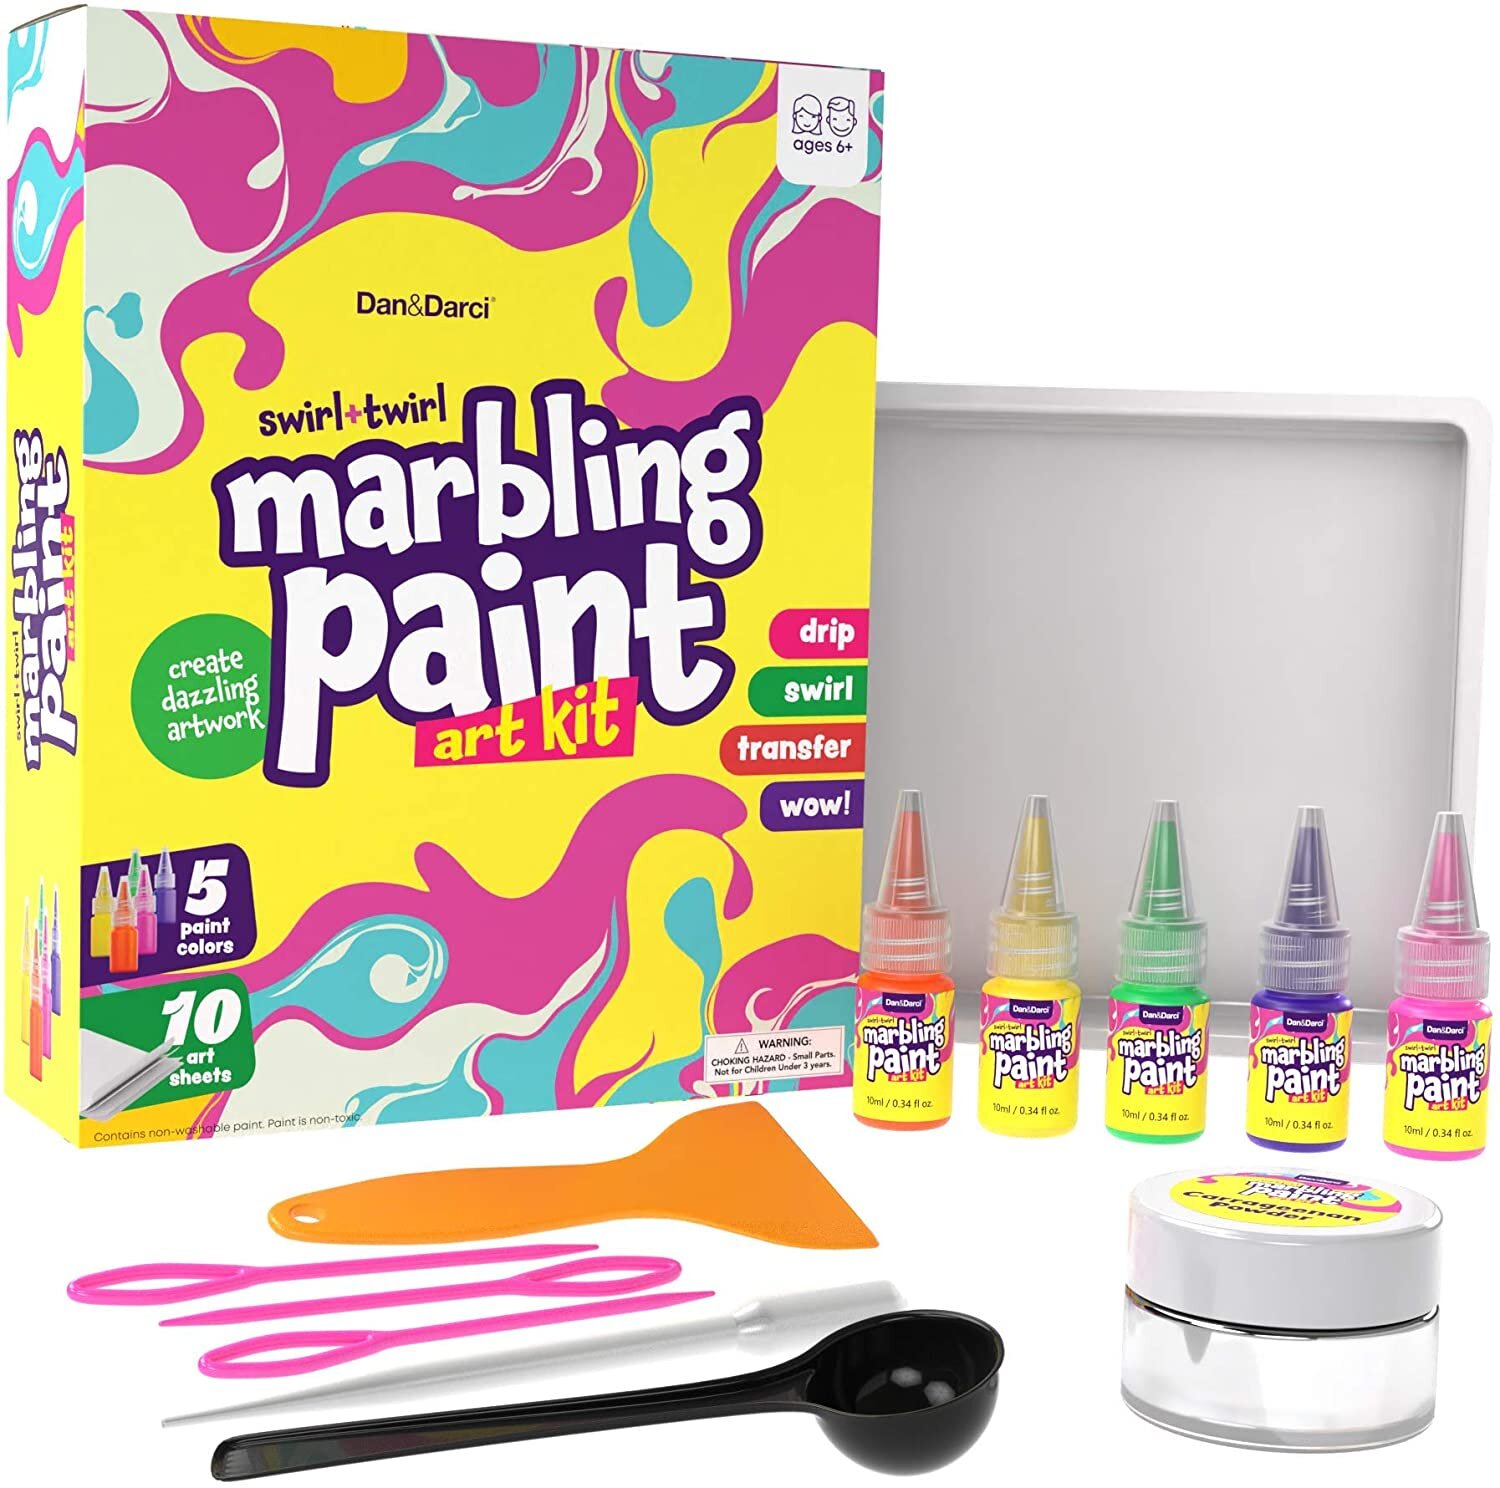 Dan&Darci Marbling Paint Art Kit for Kids - Arts & Crafts Gifts for Girls &  Boys Ages 6-12 Years Old - Craft Kits Set - Paint Gift Ideas Activities